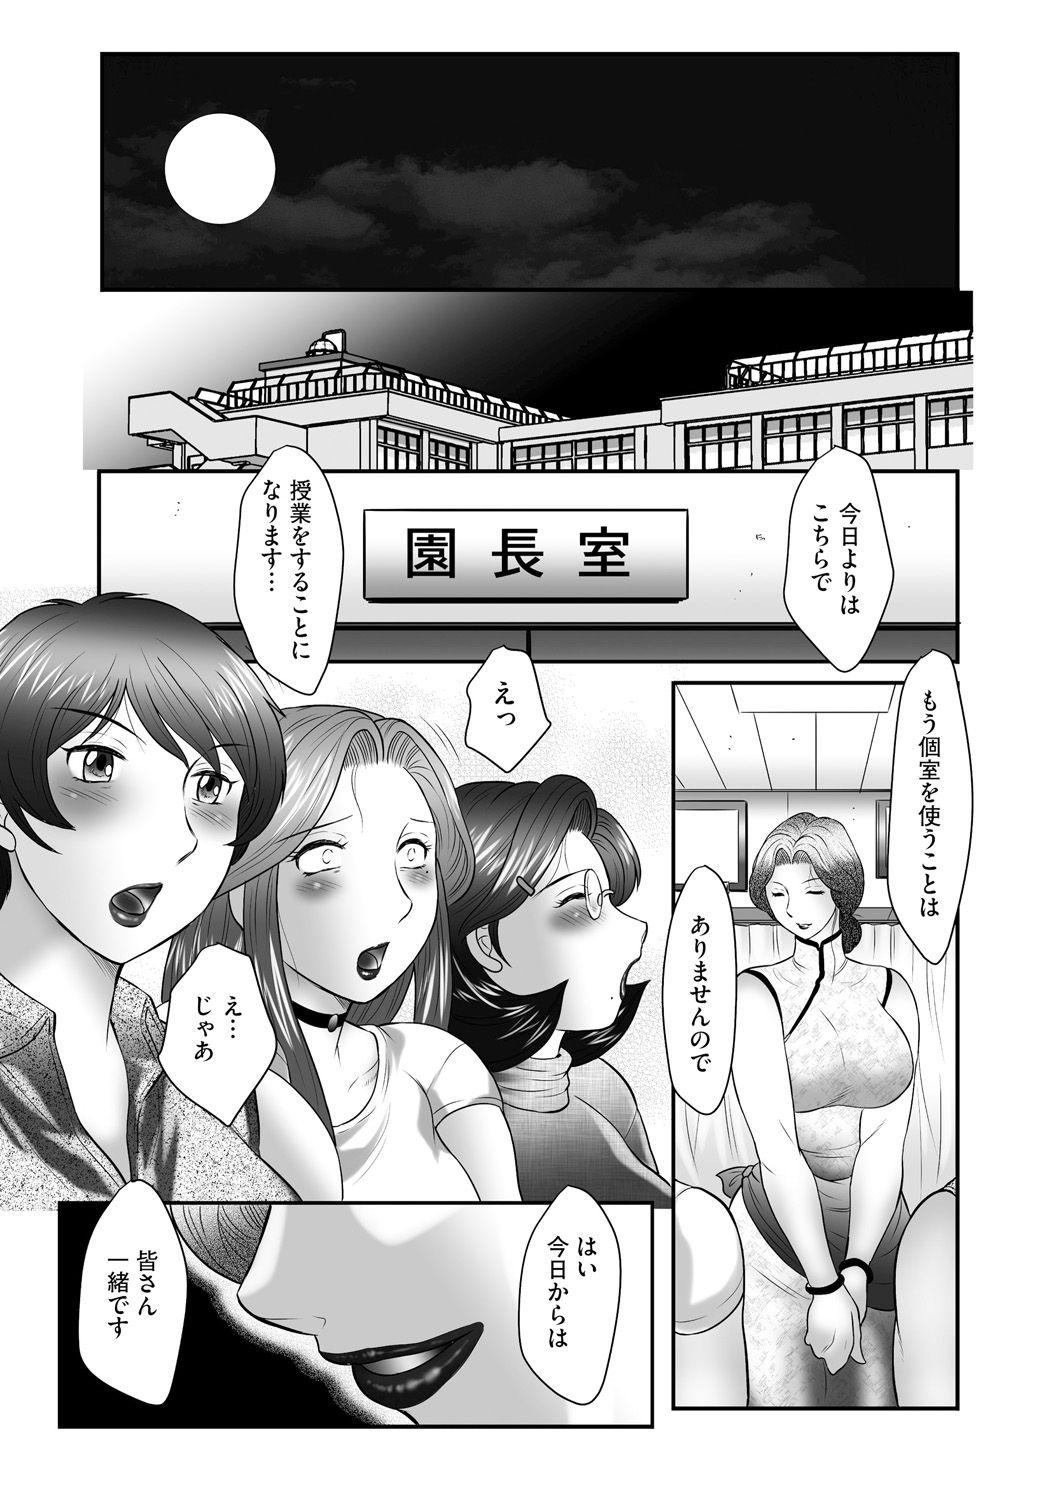 Ffm Boshi no Susume - The advice of the mother and child Ch. 9 Outdoor - Page 19